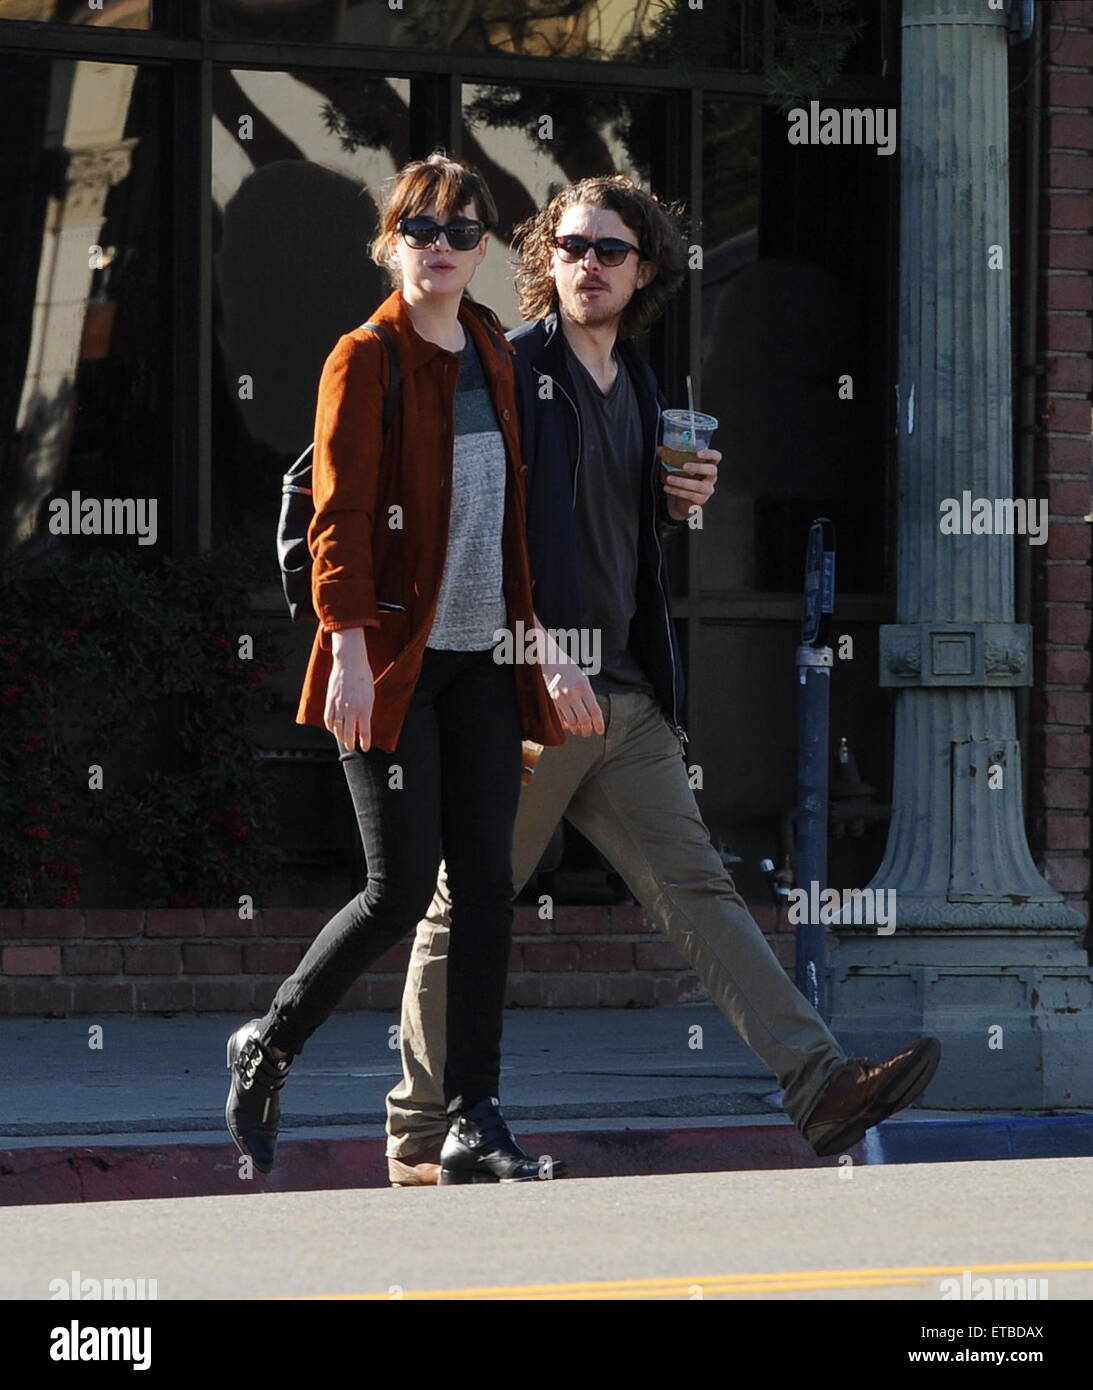 'Fifty Shades of Grey' star Dakota Johnson is all smiles after picking up her dry cleaning in Los Angeles. Afterwards, the actress headed out for lunch to Homestate cafe with a male friend  Featuring: Dakota Johnson Where: Los Angeles, California, United States When: 14 Jan 2015 Credit: Cousart/JFXimages/WENN.com Stock Photo